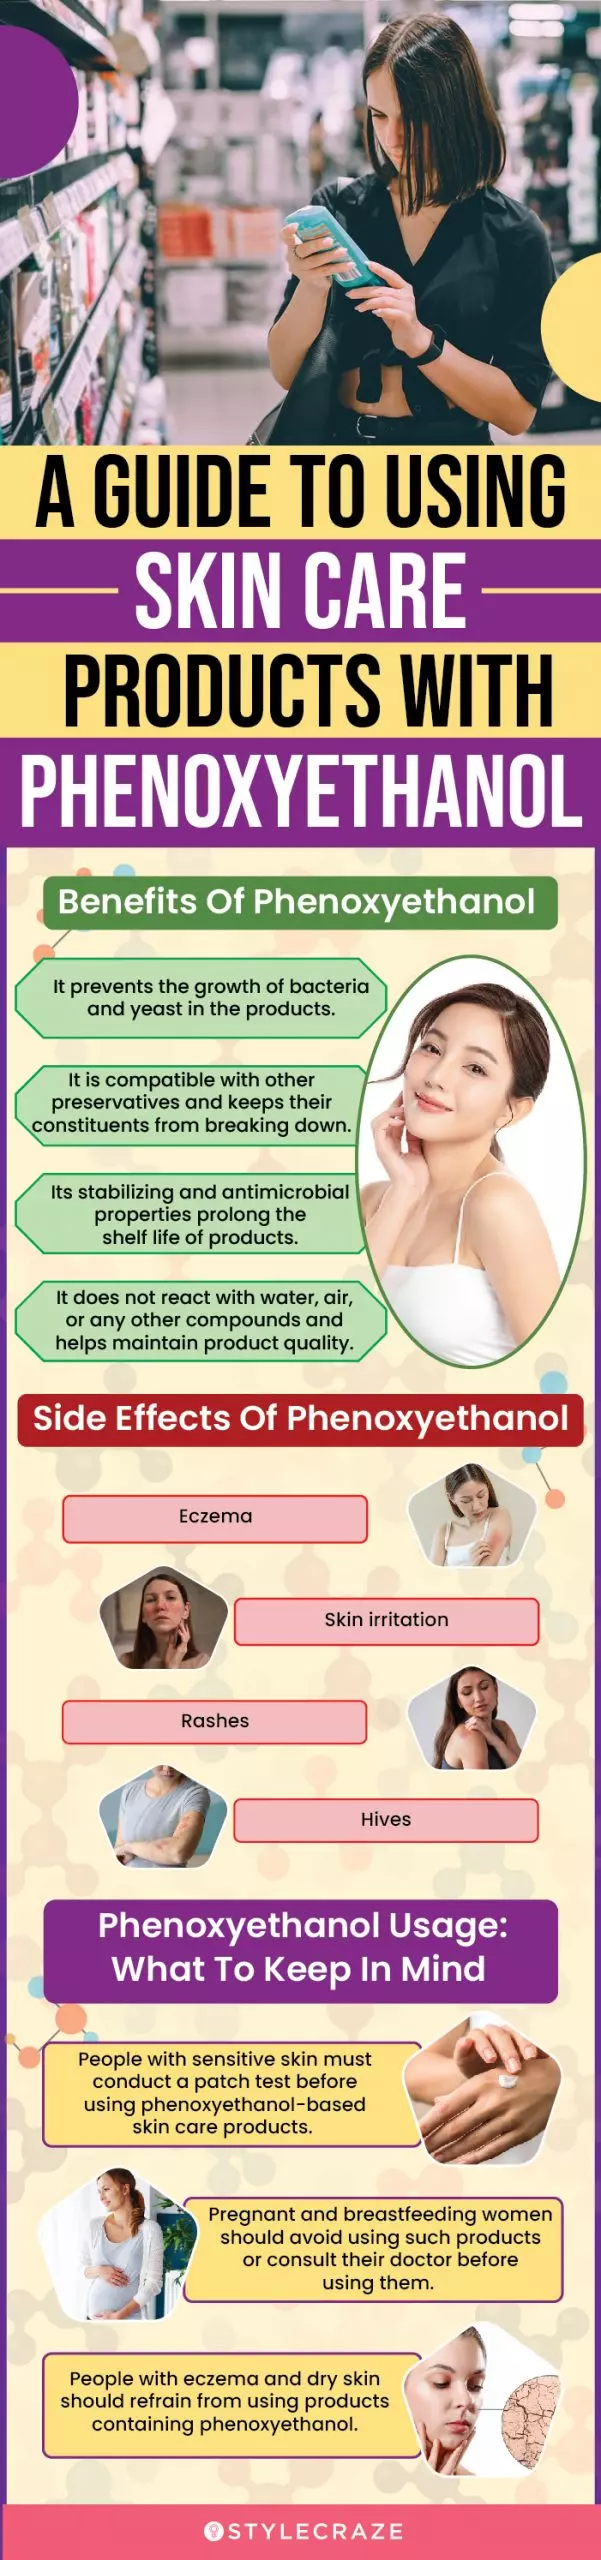 a guide to using skin care products with phenoxyethanol (infographic)